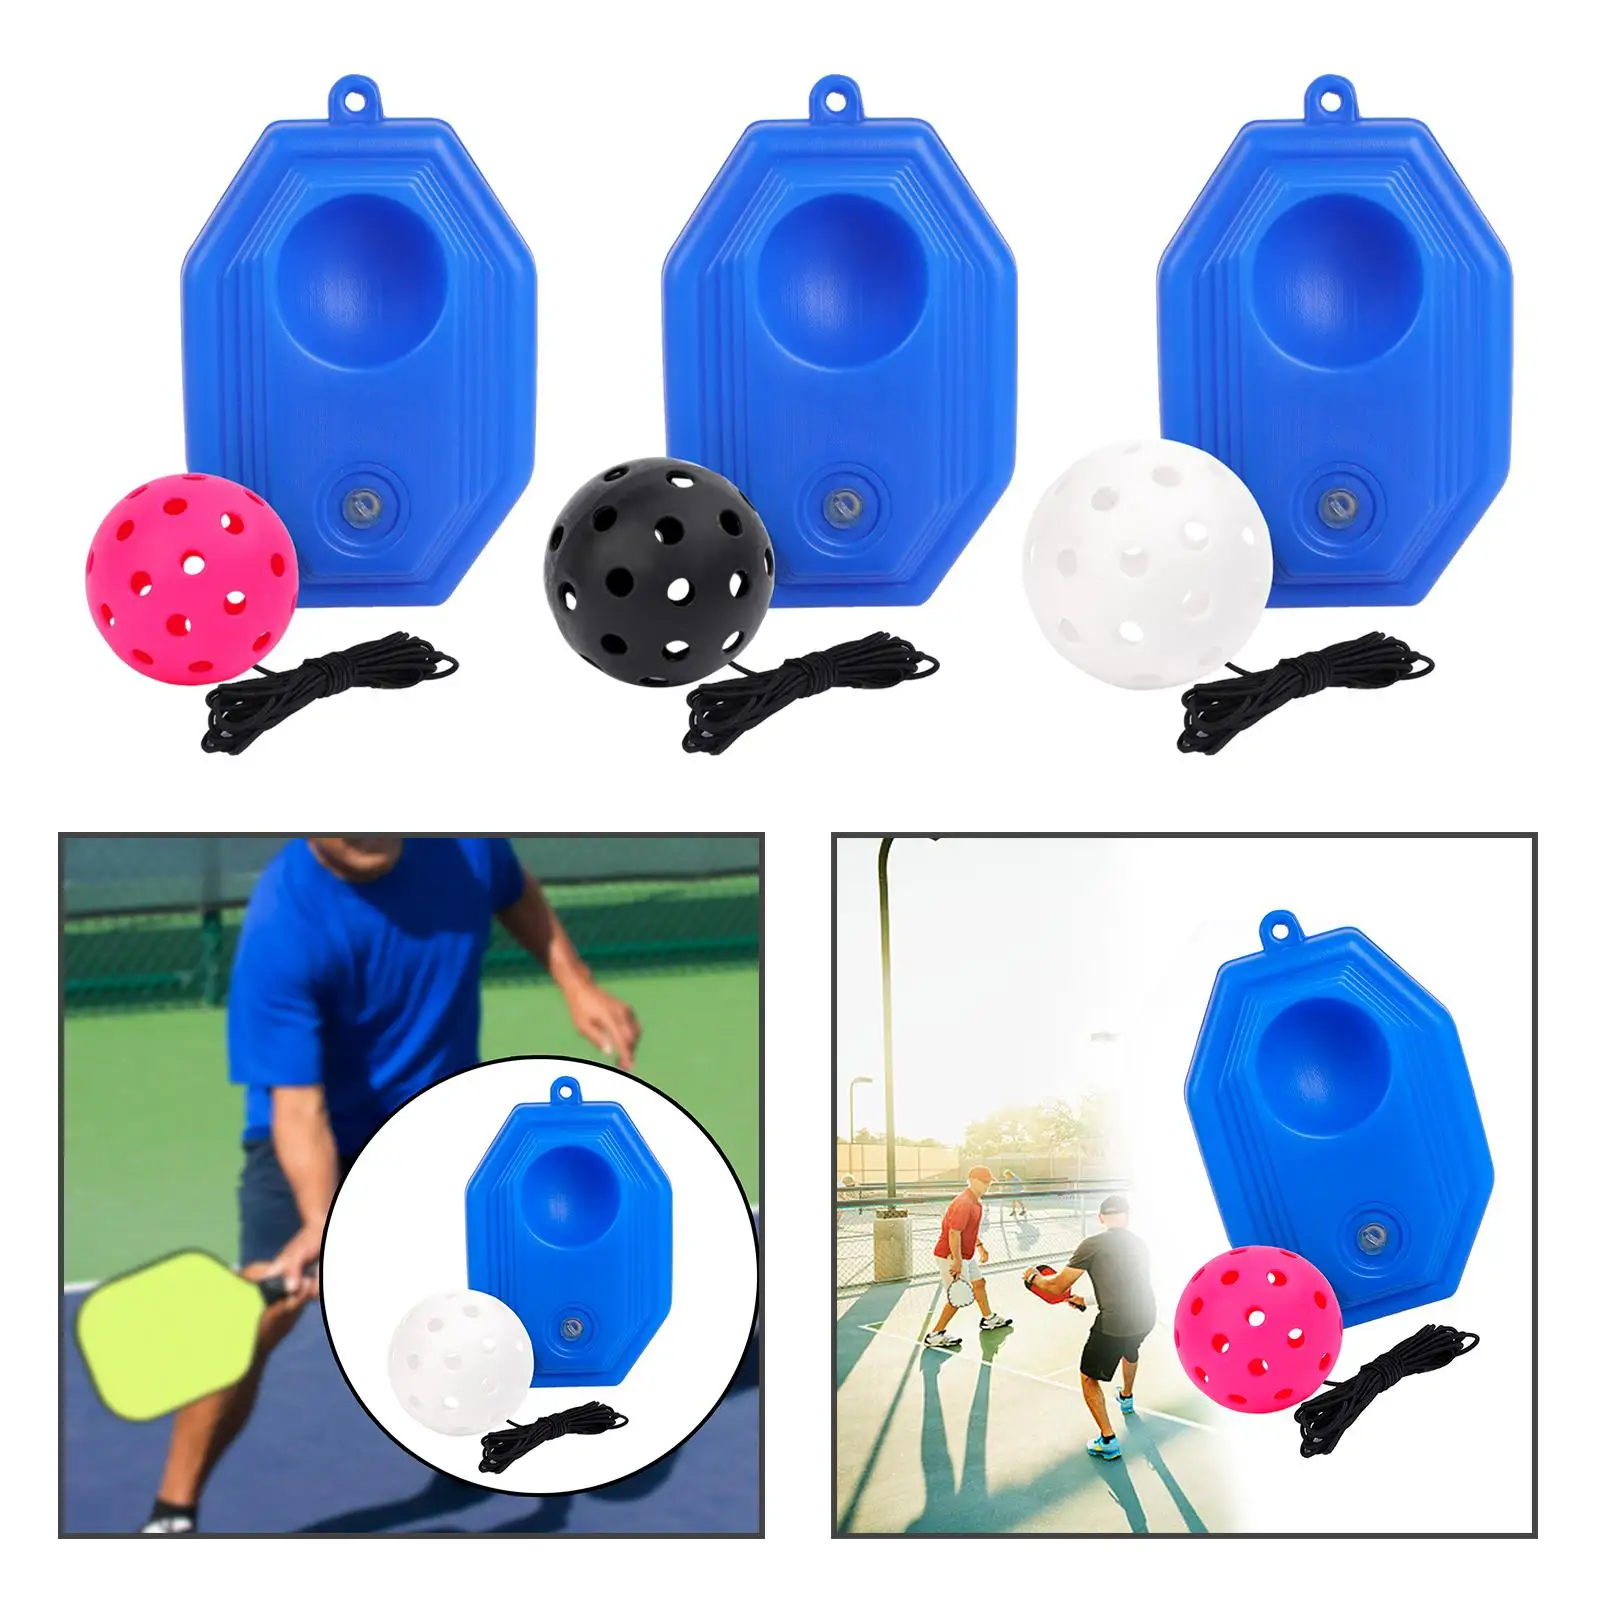 Pickleball Trainer Portable with Pickleball Ball Pickleball Training Equipment for Practice Beginners Exercise Tool Kids Adults